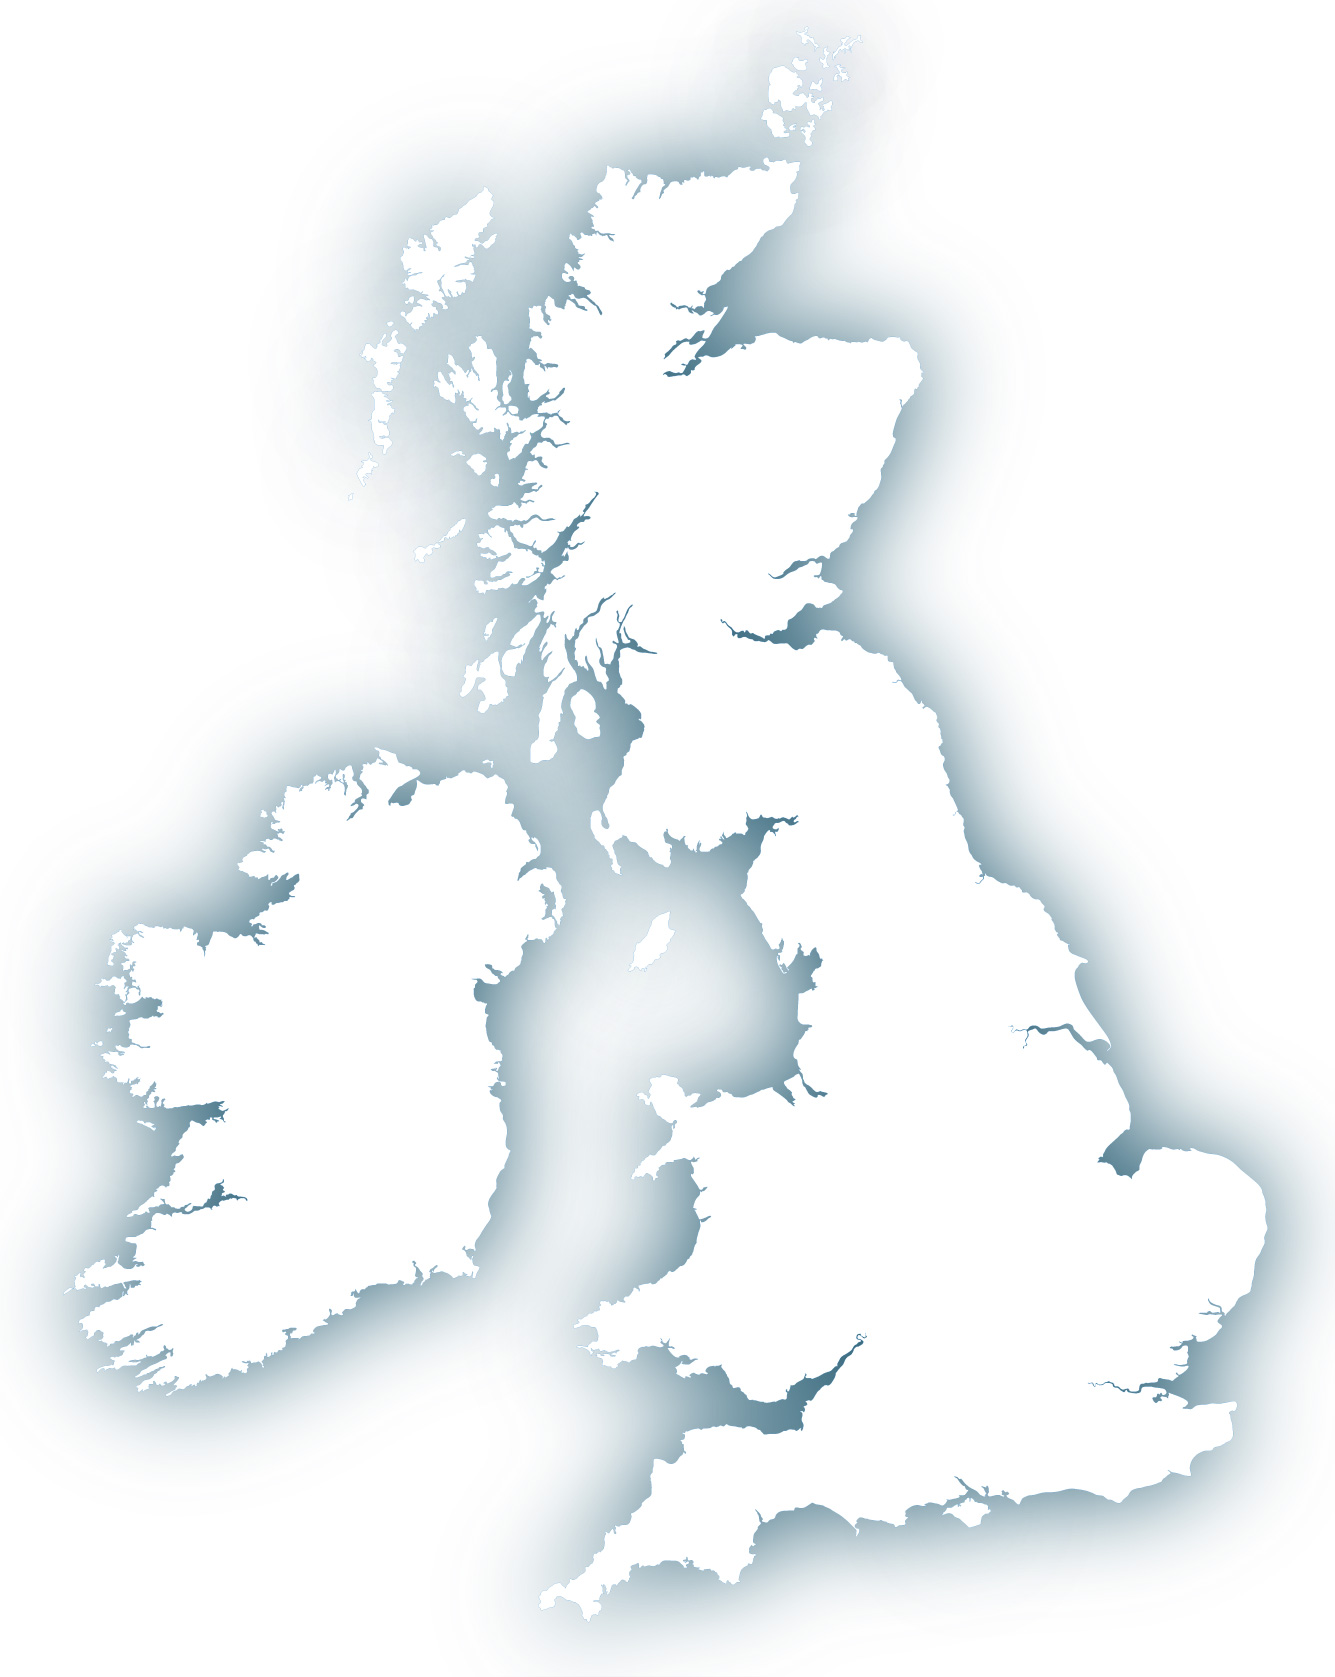 clipart map of uk and ireland - photo #29